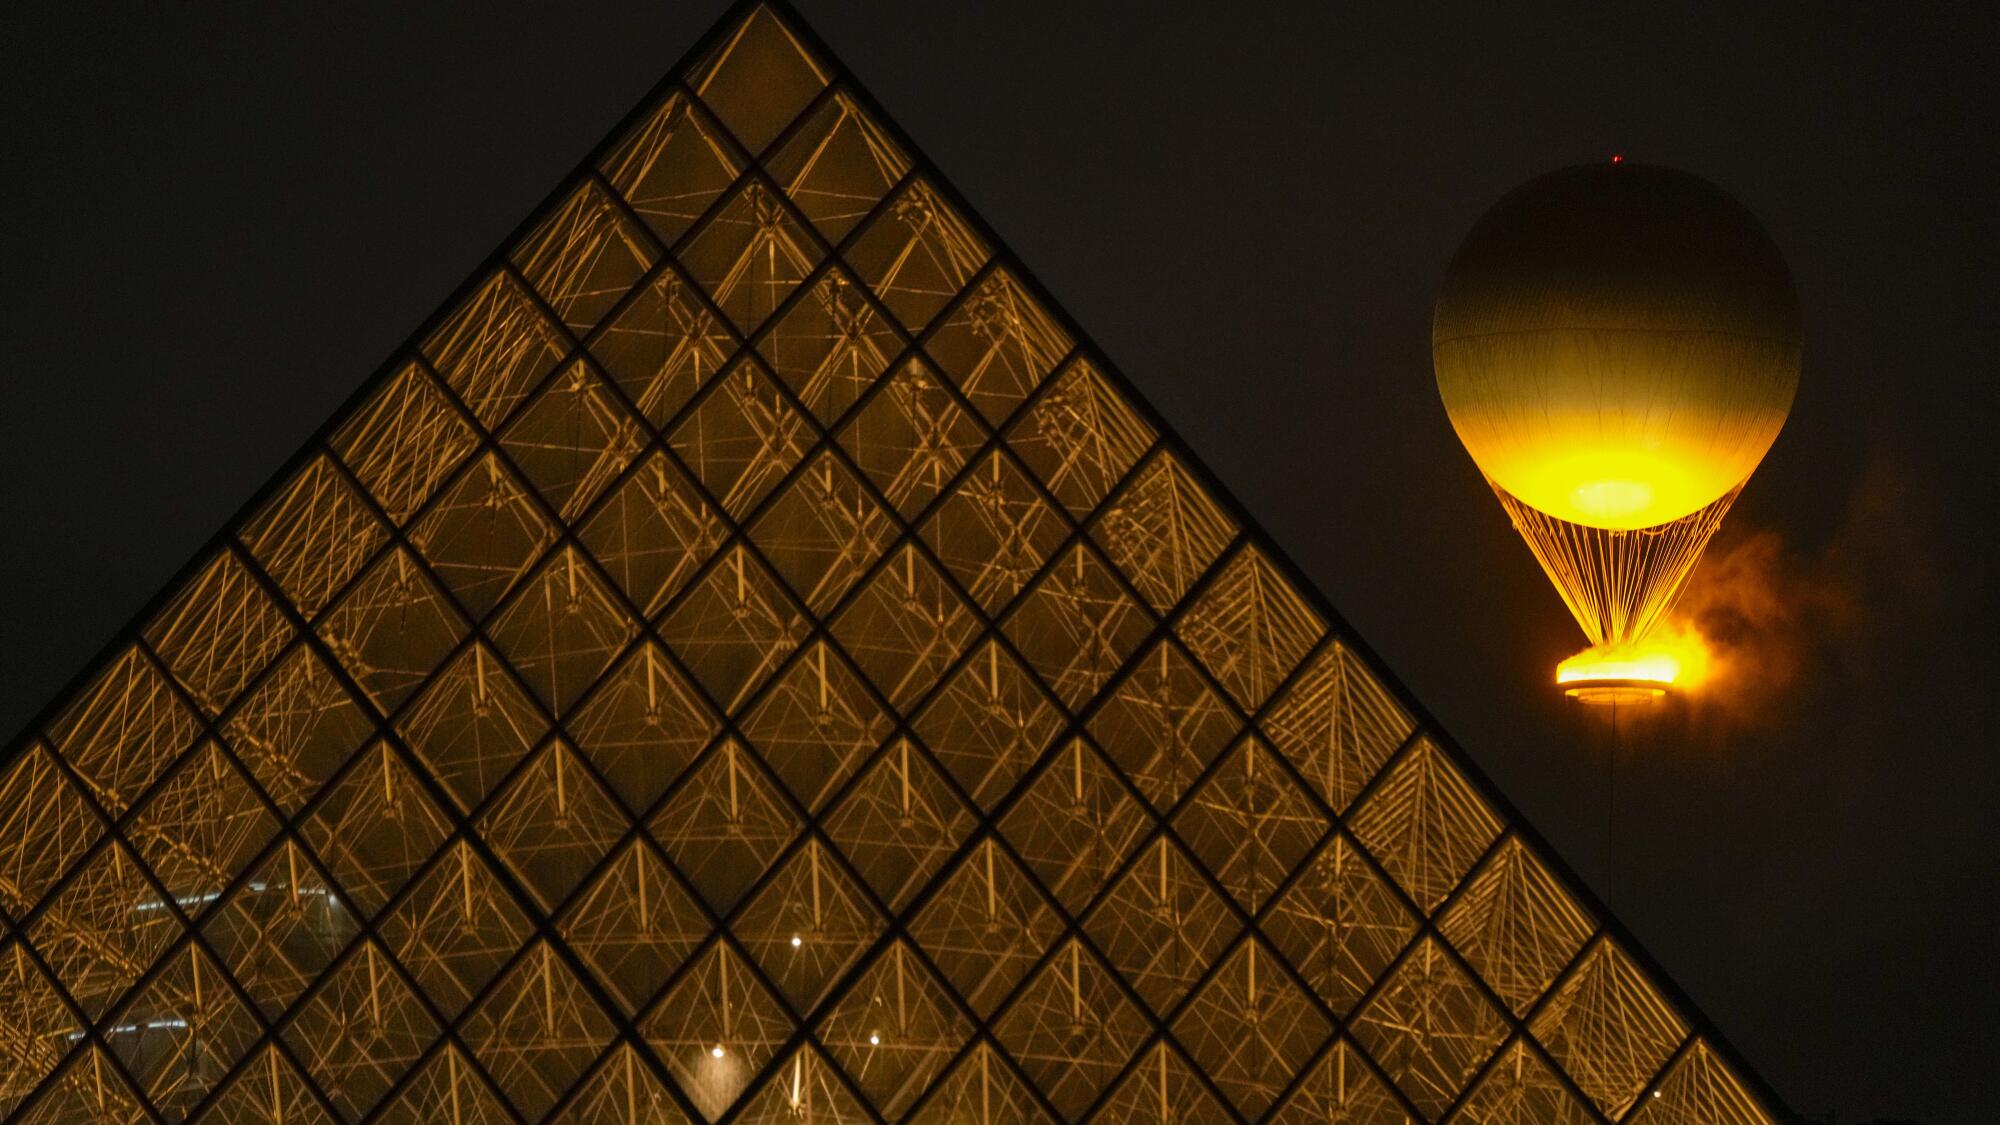 The Olympic flame rises on a balloon over the Louvre after being lit in Paris during the opening ceremony.